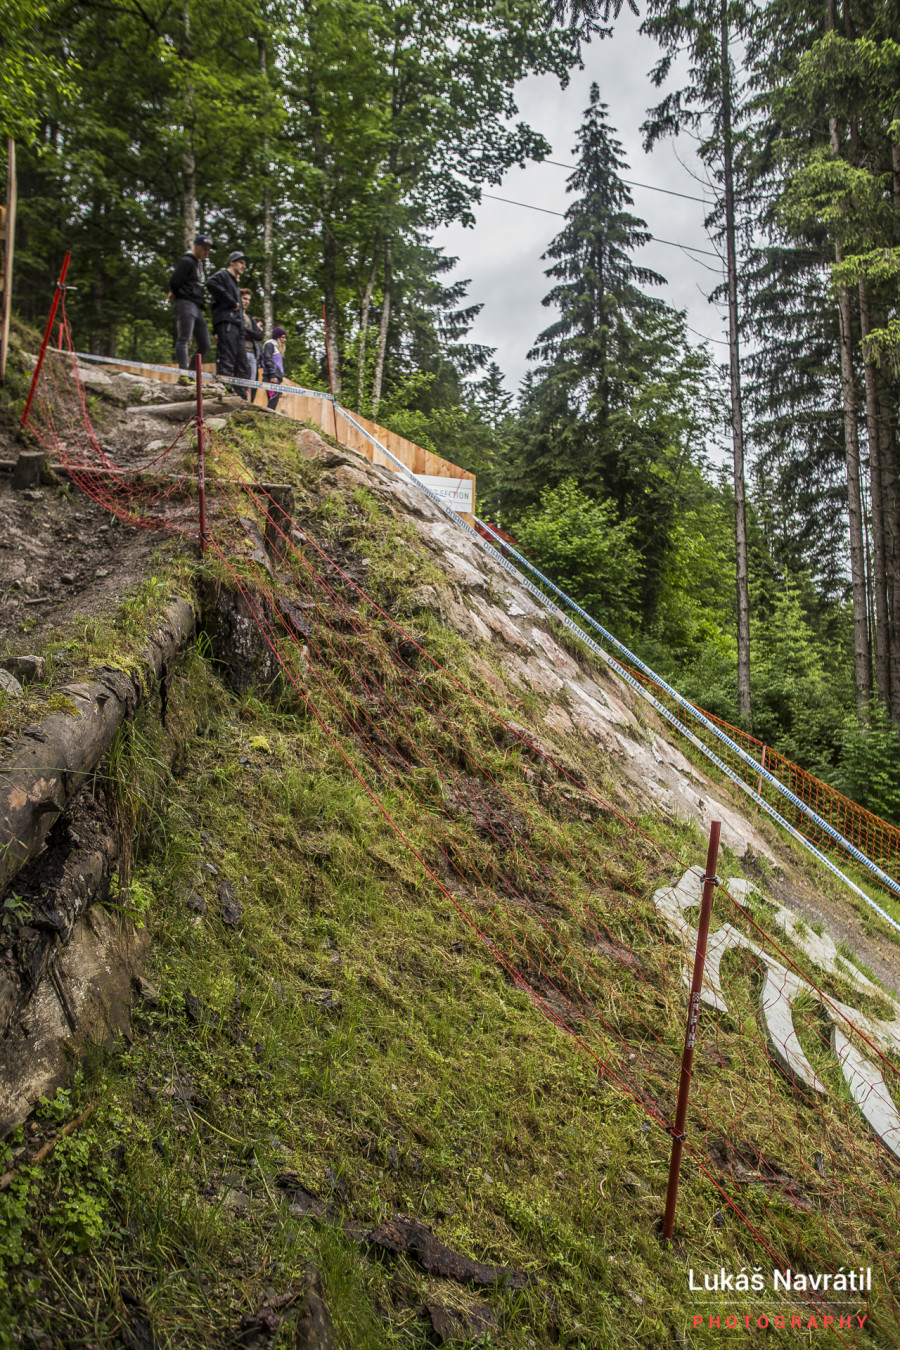 The steep roll down into the finish arena remains.